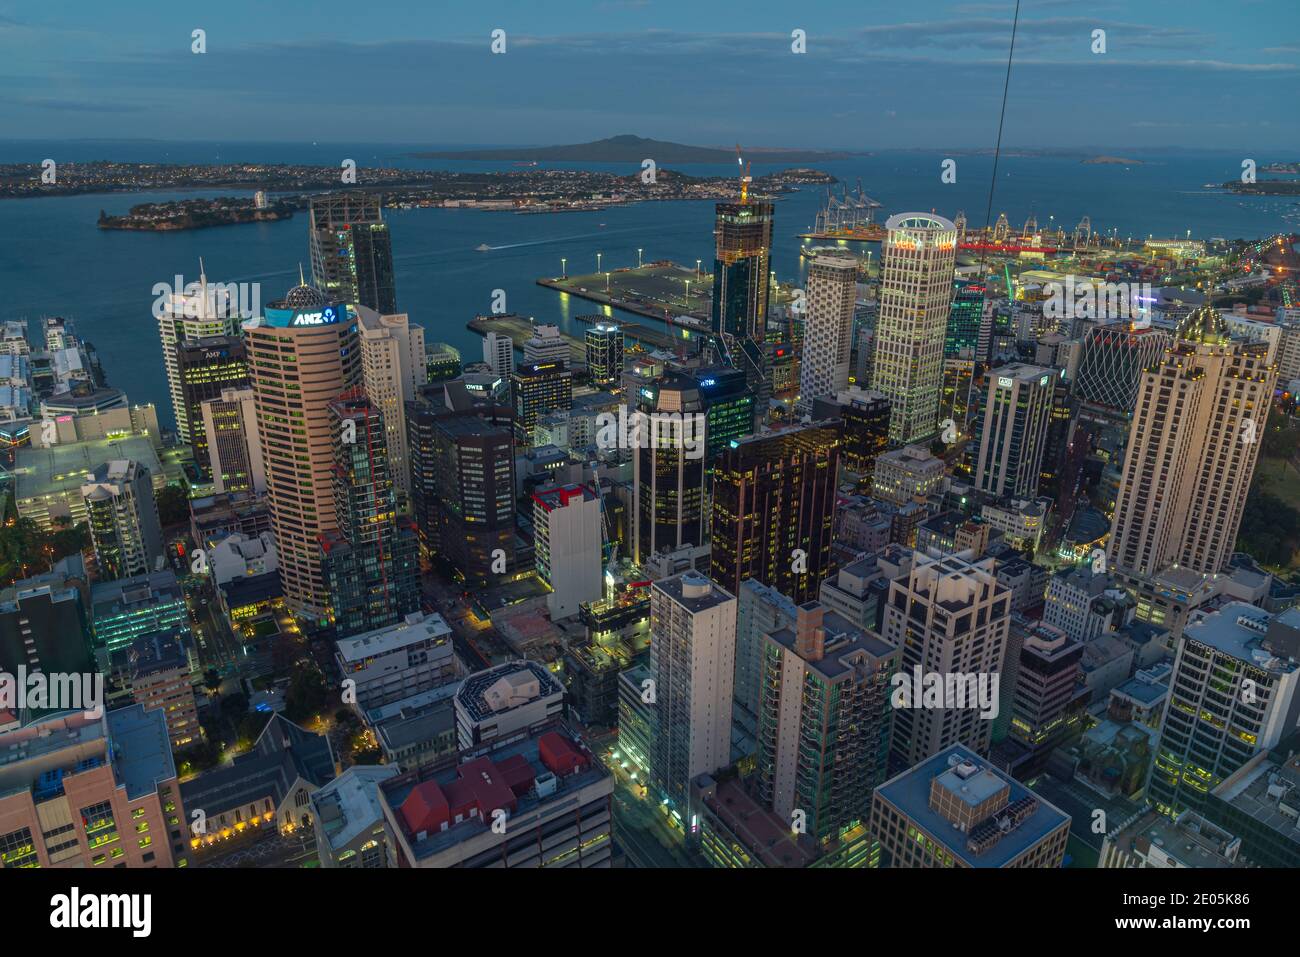 AUCKLAND, NEW ZEALAND, FEBRUARY 19, 2020: Night aerial view of downtown Auckland from Sky tower, New Zealand Stock Photo